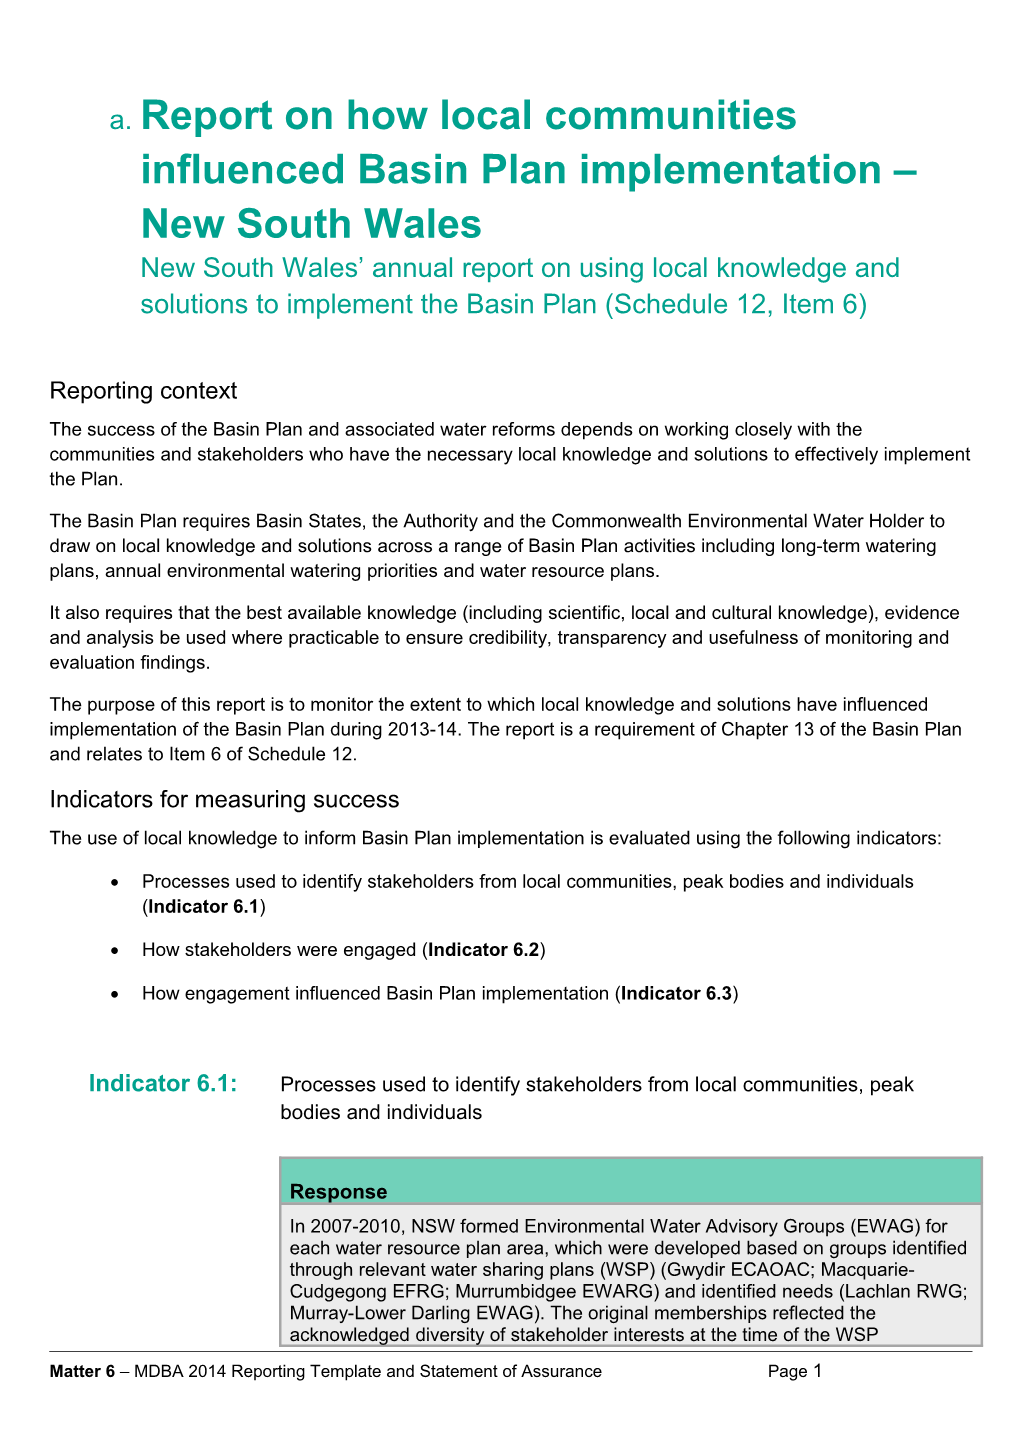 Report on How Local Communities Influenced Basin Plan Implementation New South Walesnew